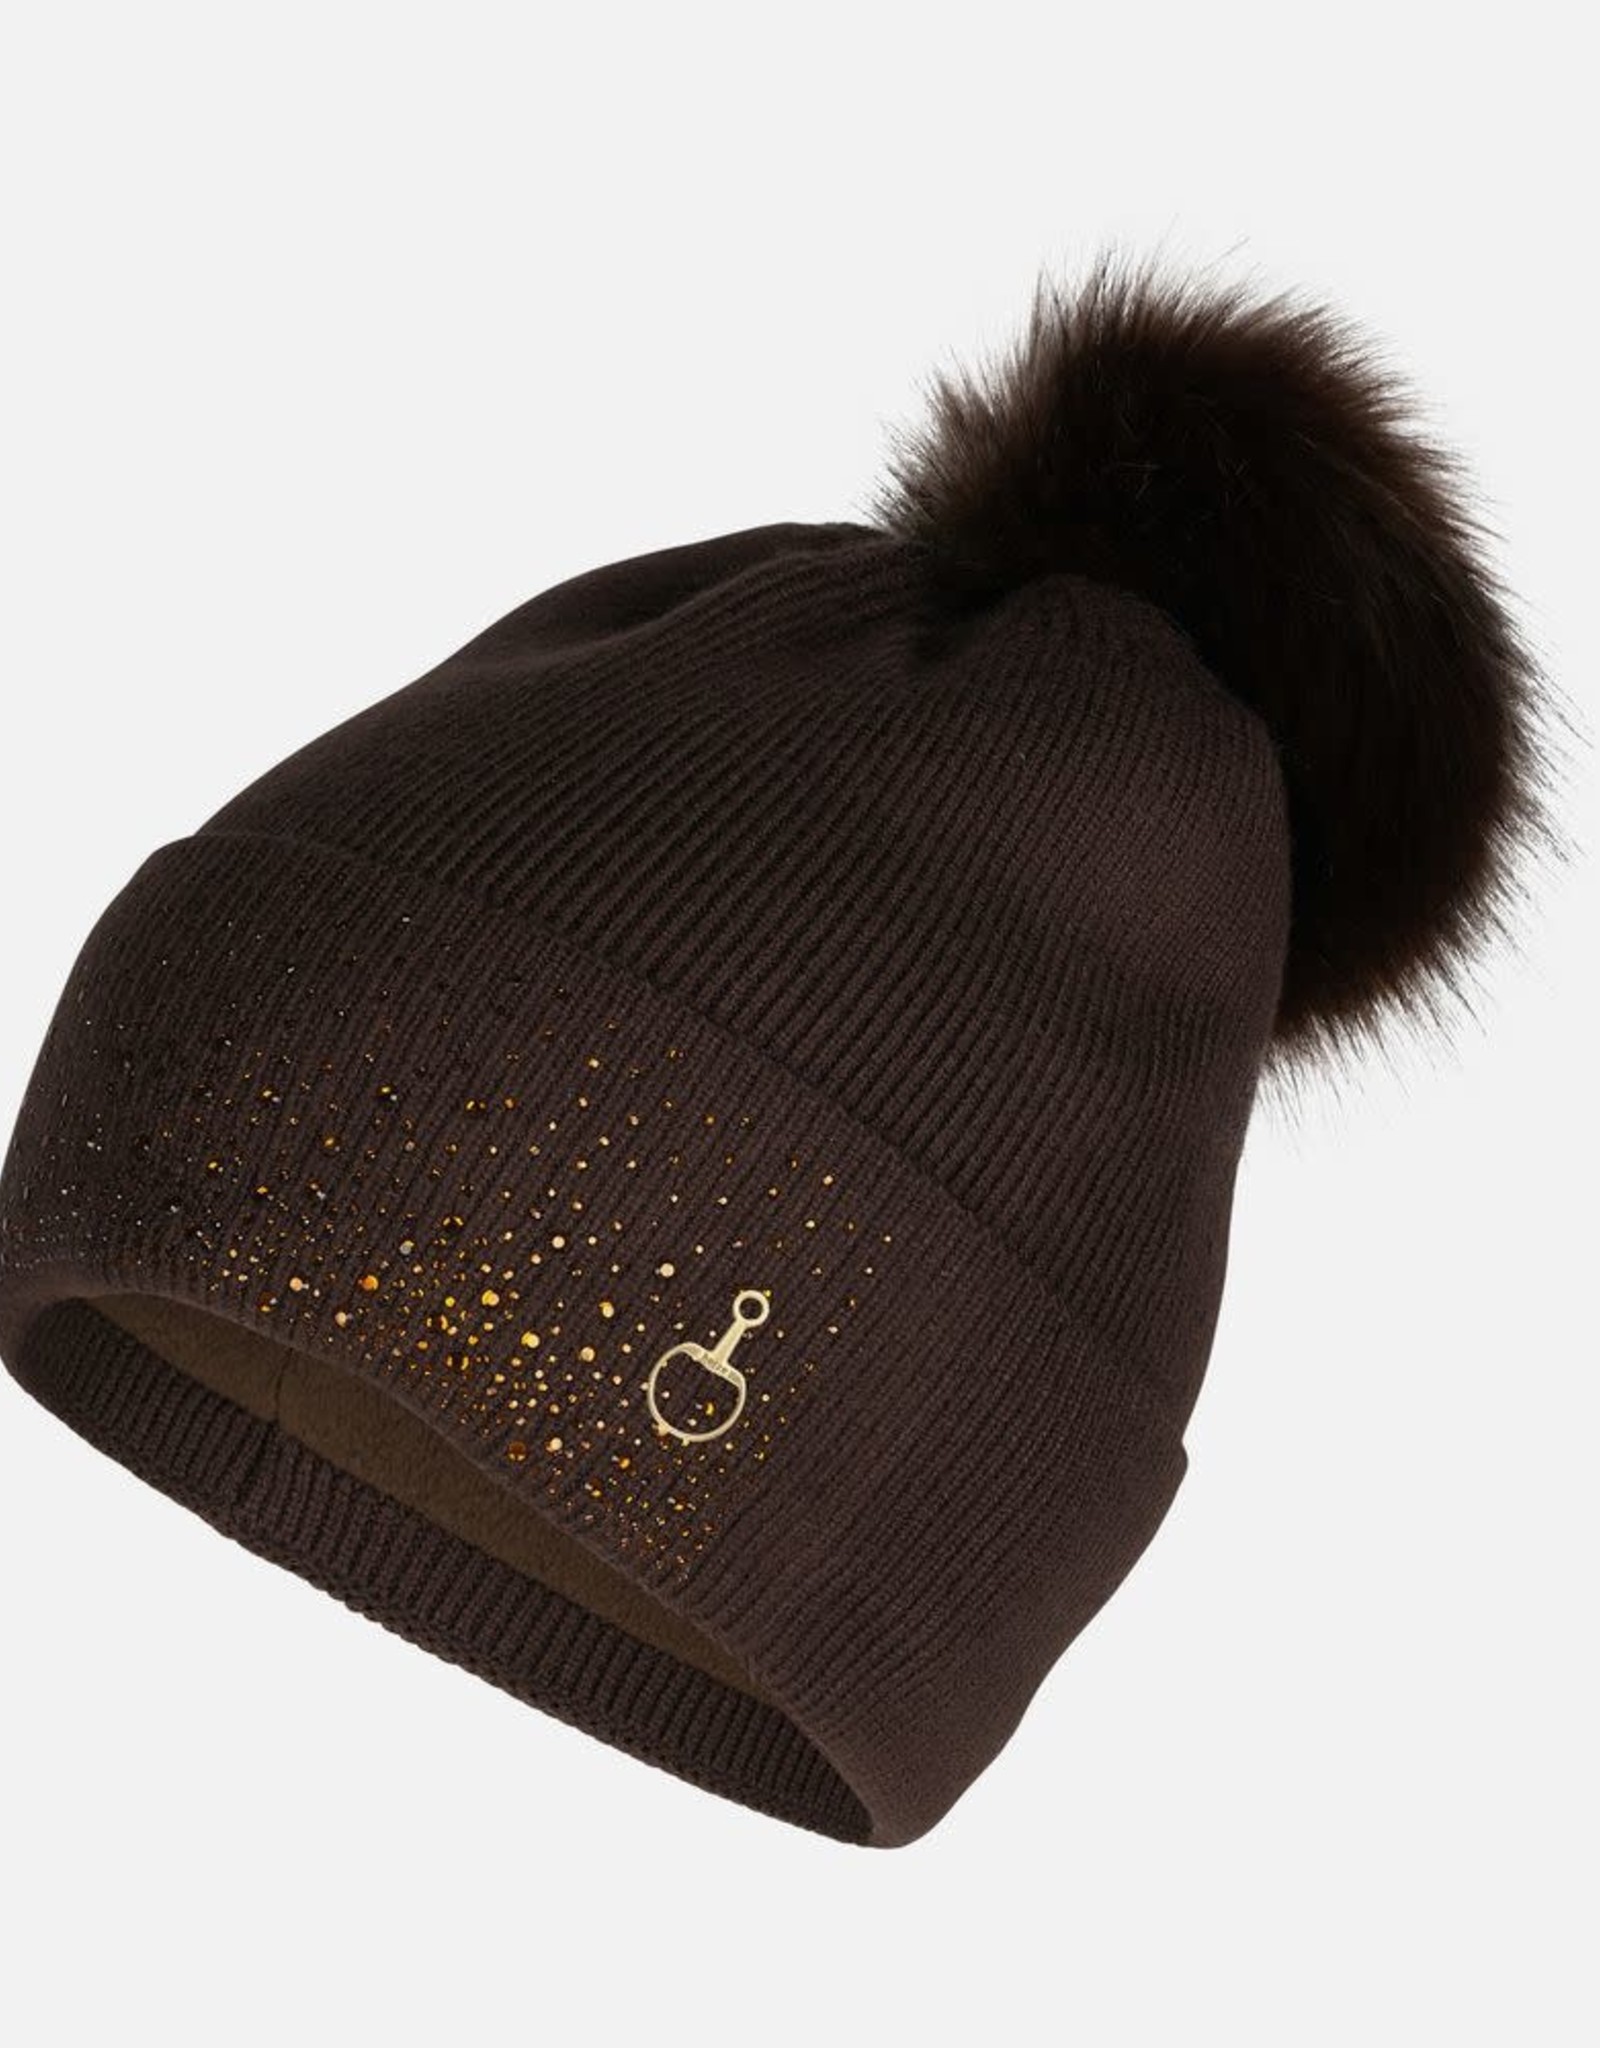 HORZE LEONA KNITTED HAT WITH CRYSTALS